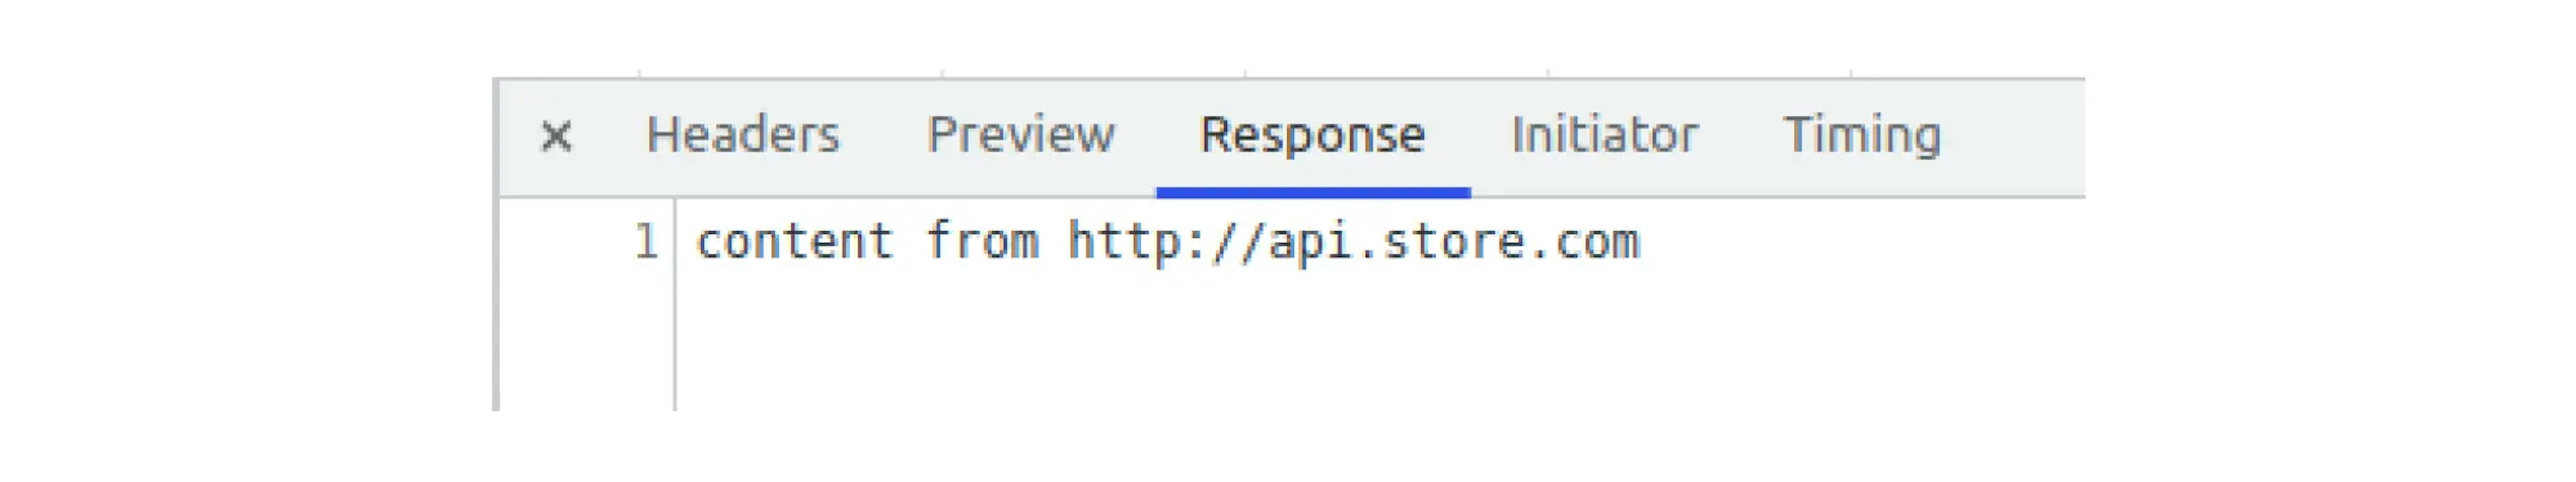 Response Tab in the Browser Console